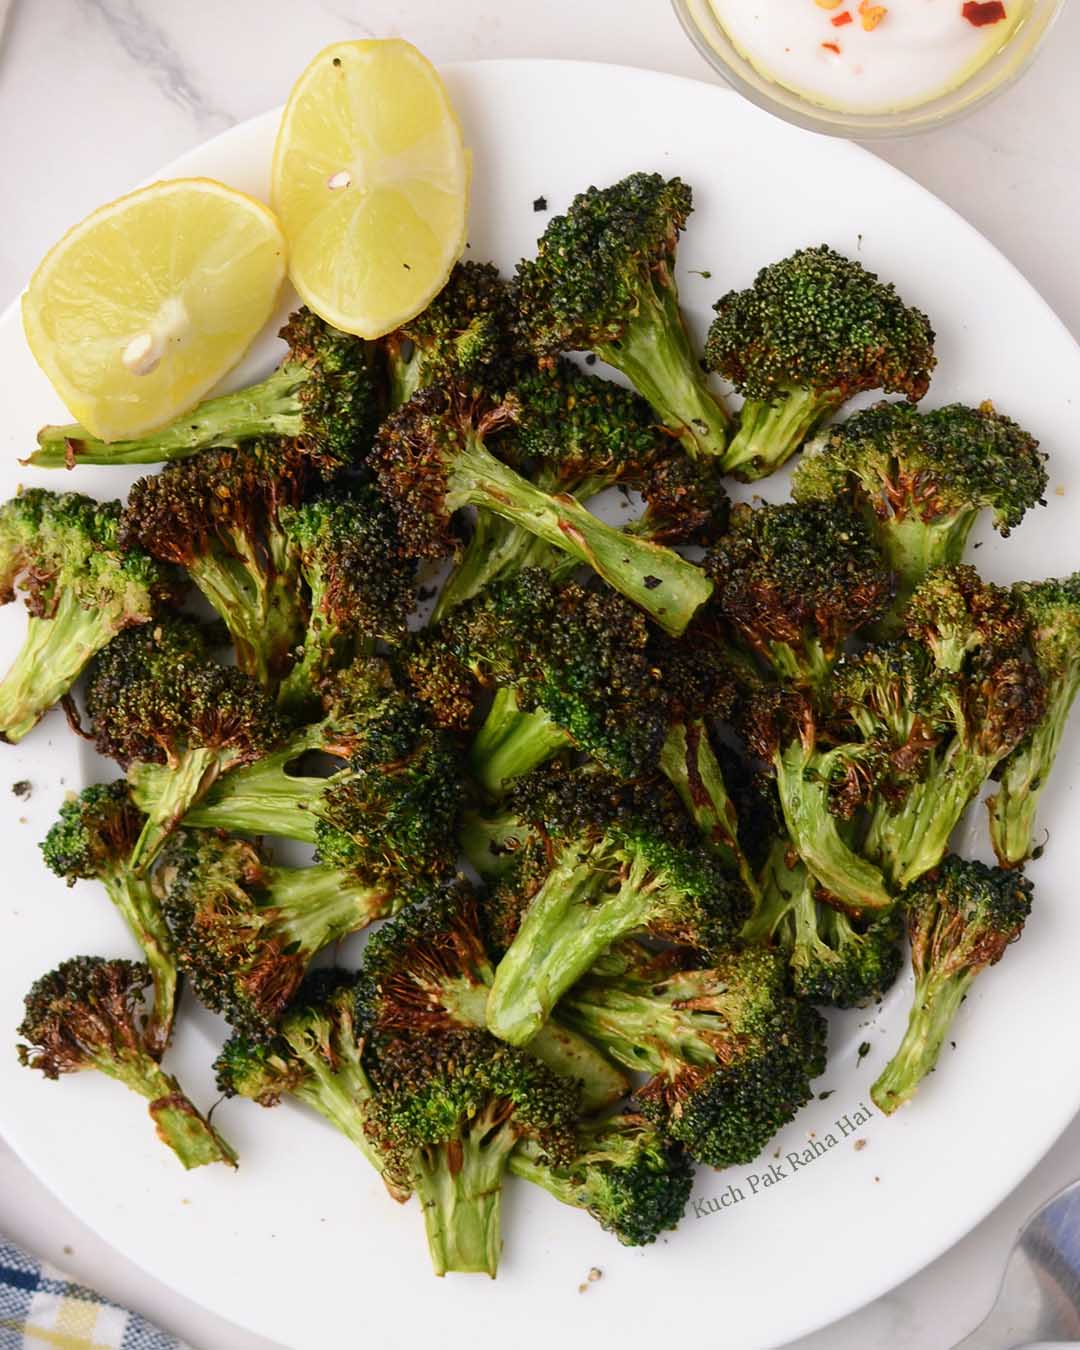 Roasted Broccoli In Air Fryer.